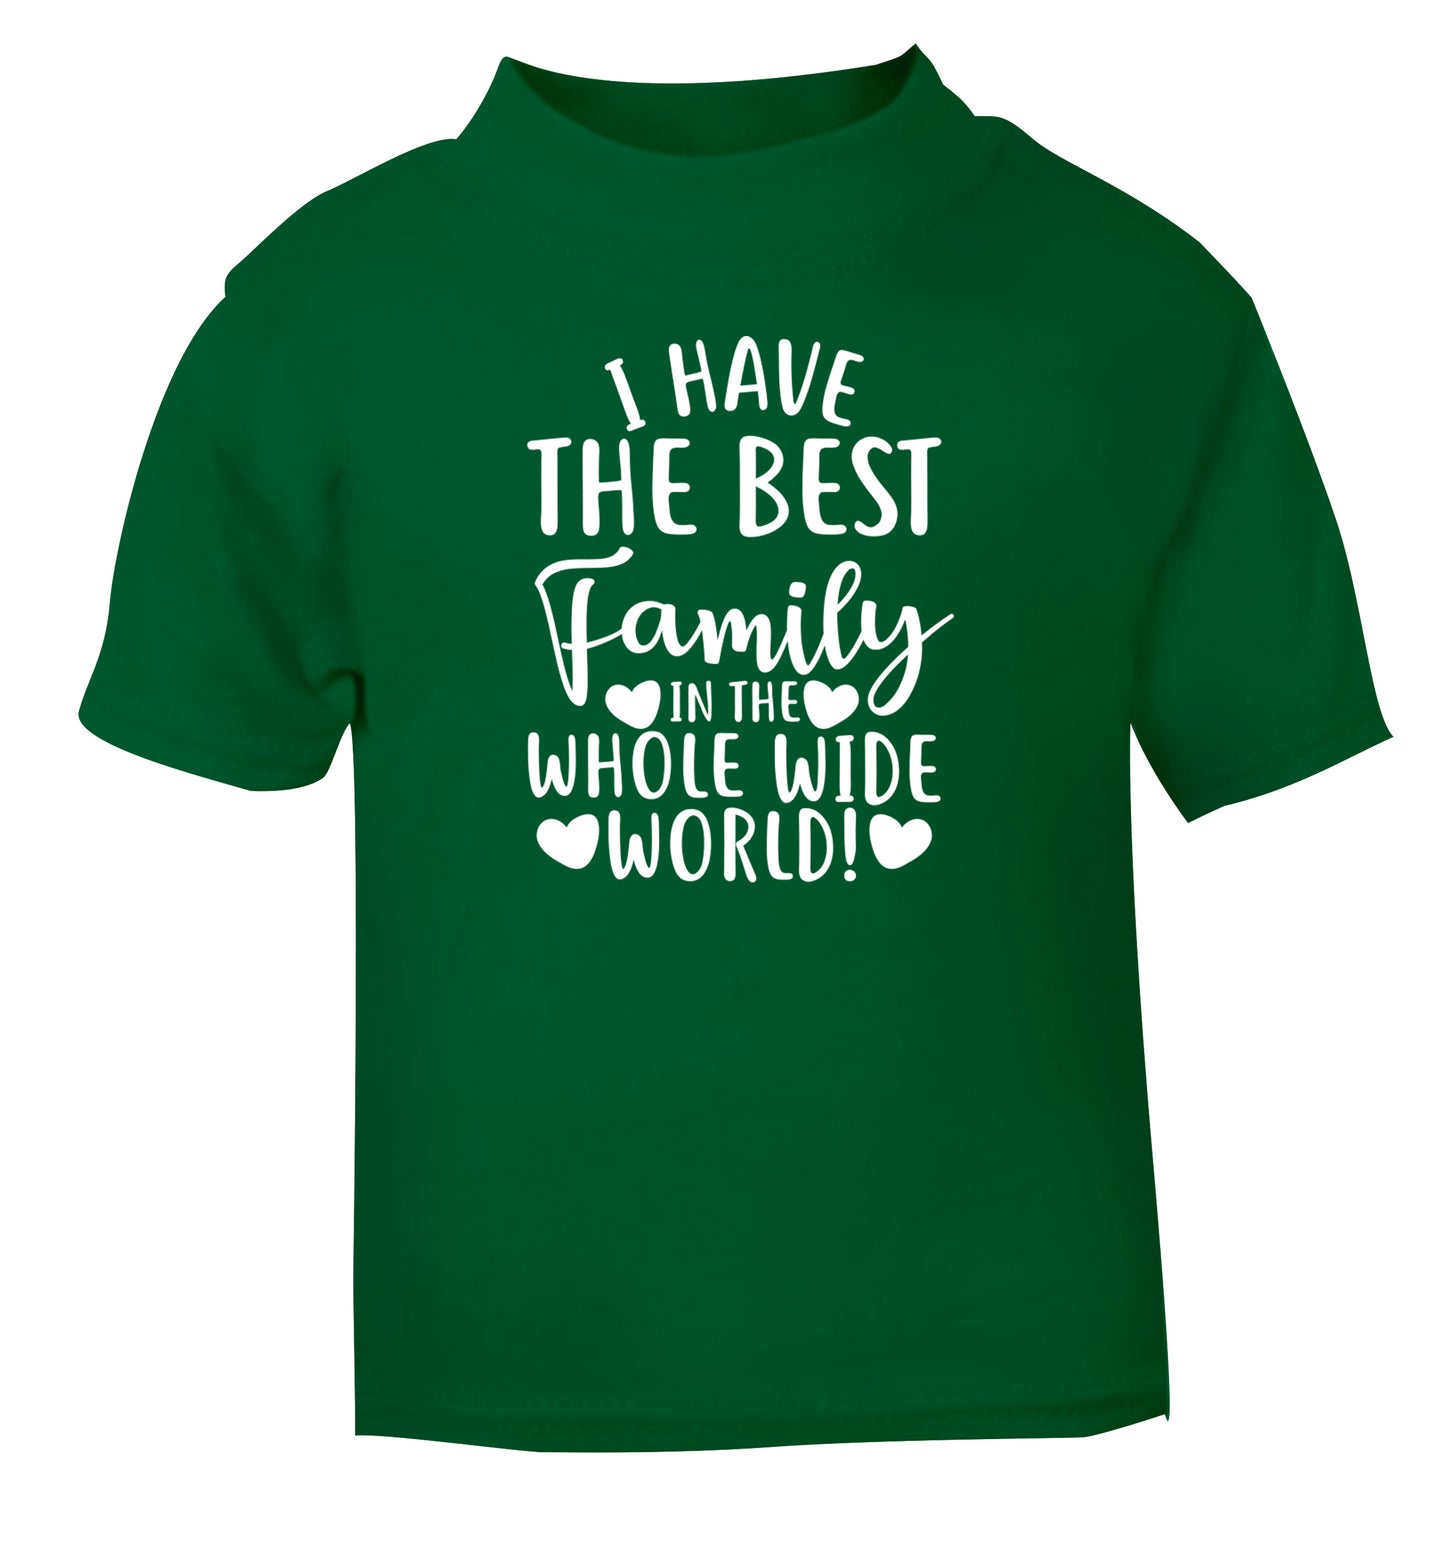 I have the best family in the whole wide world! green Baby Toddler Tshirt 2 Years